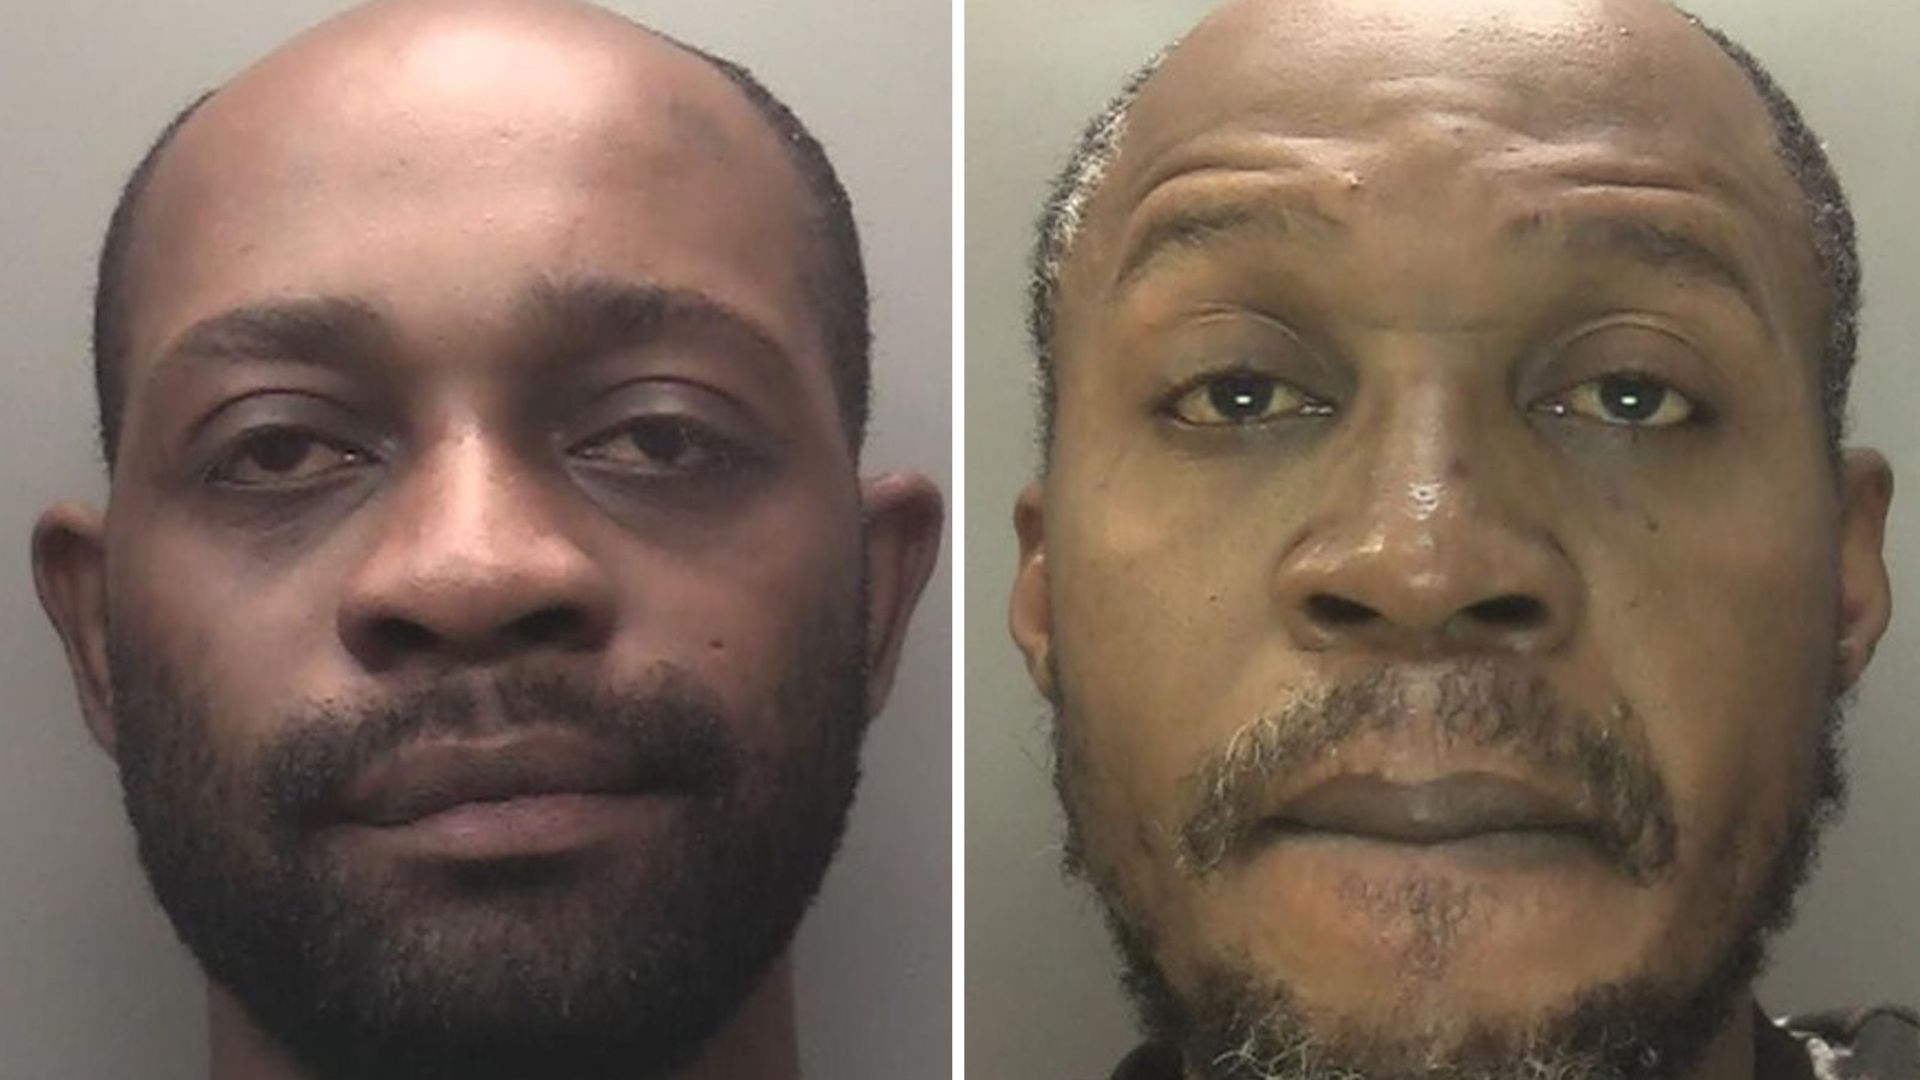 Men jailed for raping vulnerable woman who was lost in Birmingham